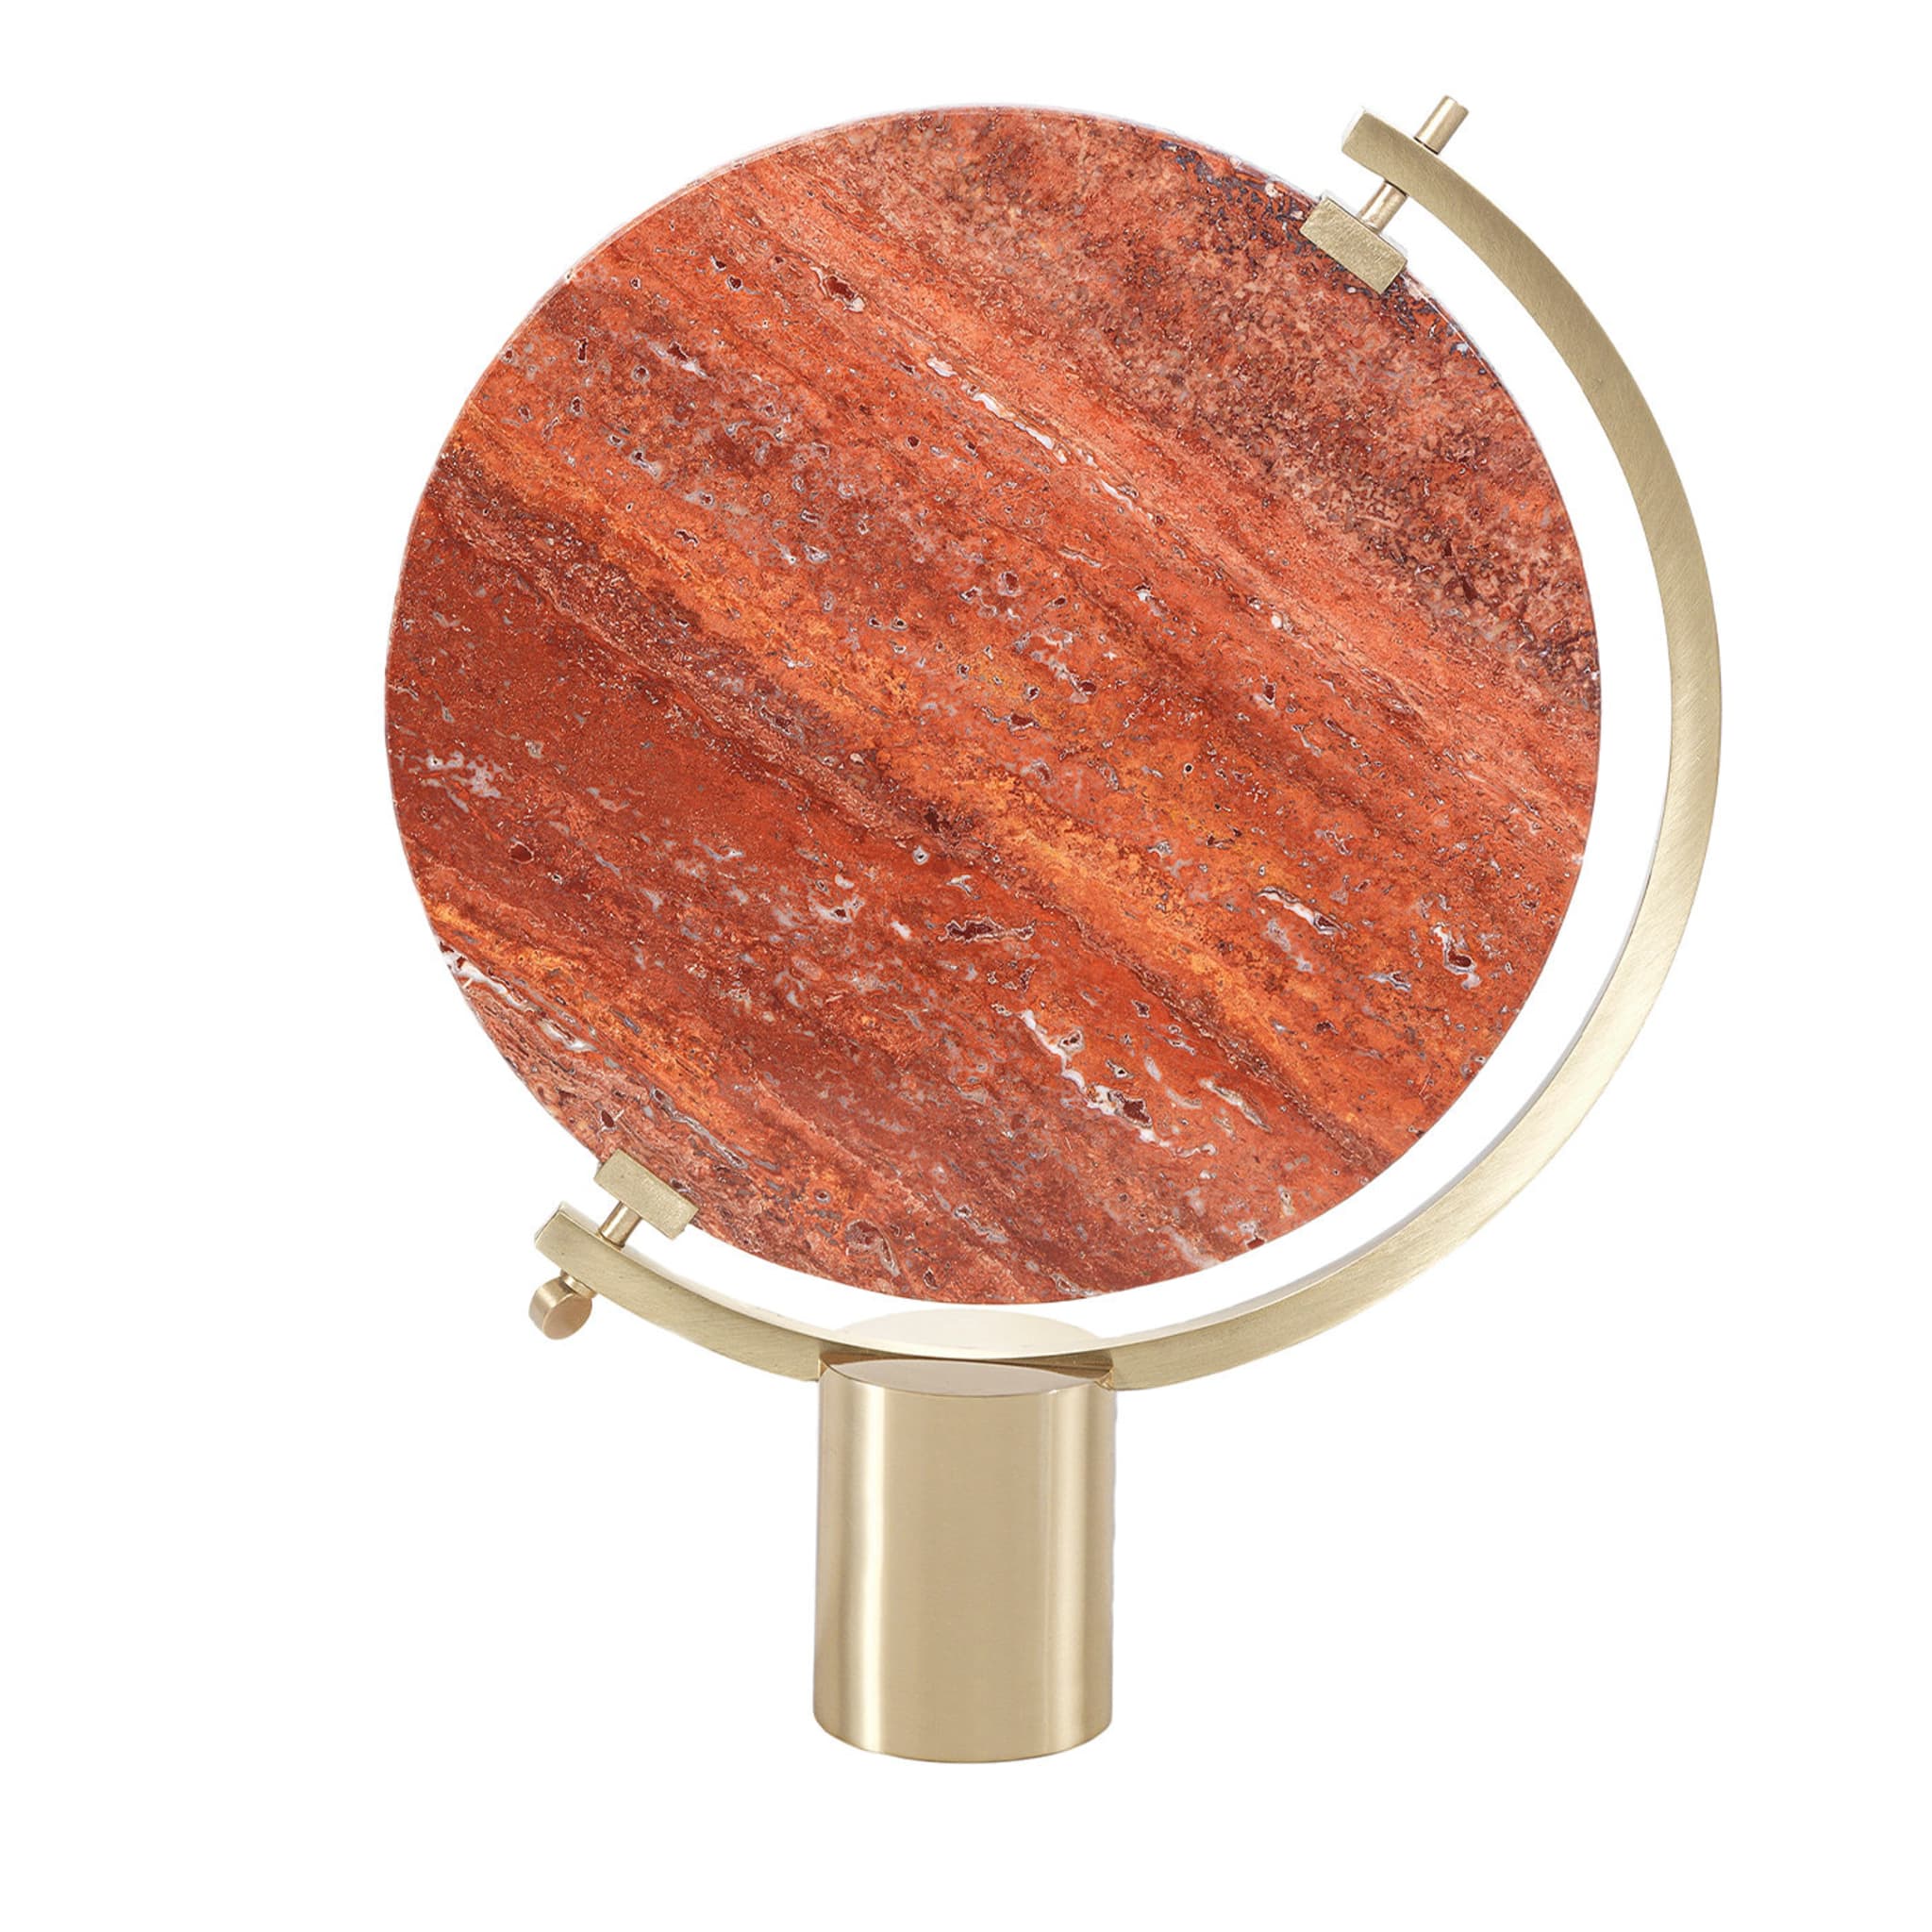 Naia Tabletop Mirror in Red Travertine Marble by CTRLZAK - Main view